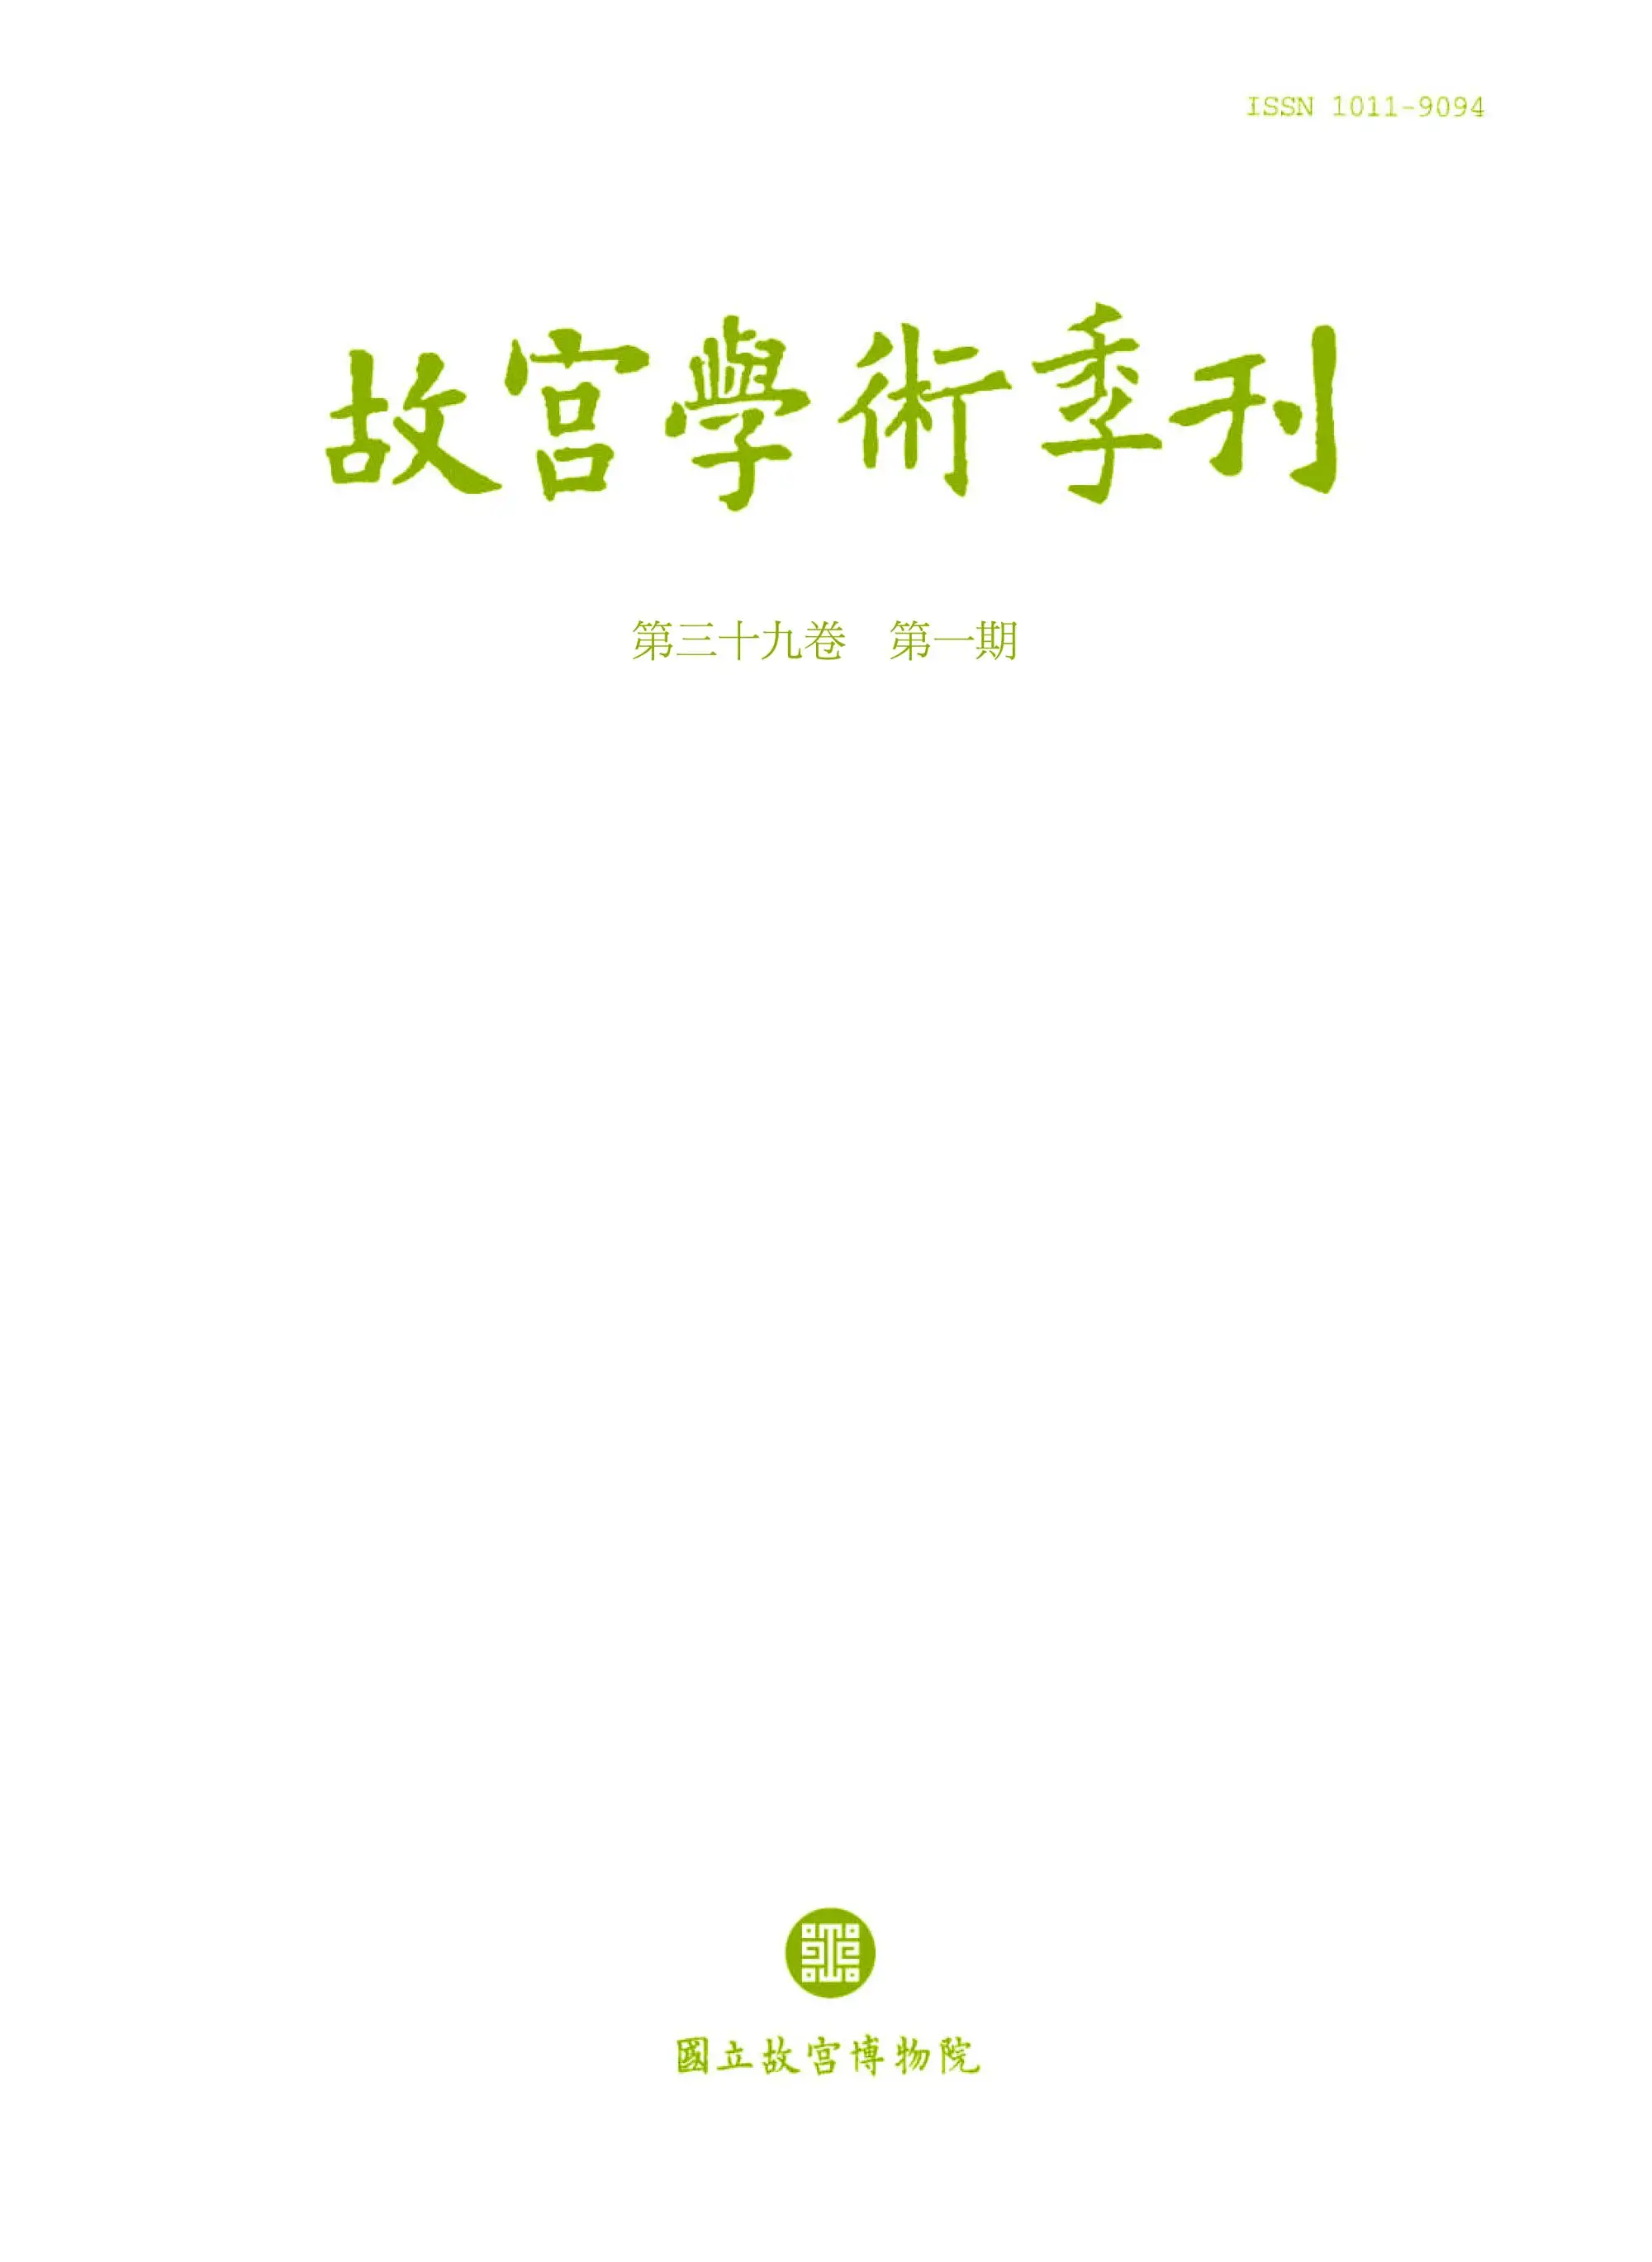 The National Palace Museum Research Quarterly 故宮學術季刊 – 01 一月 2022